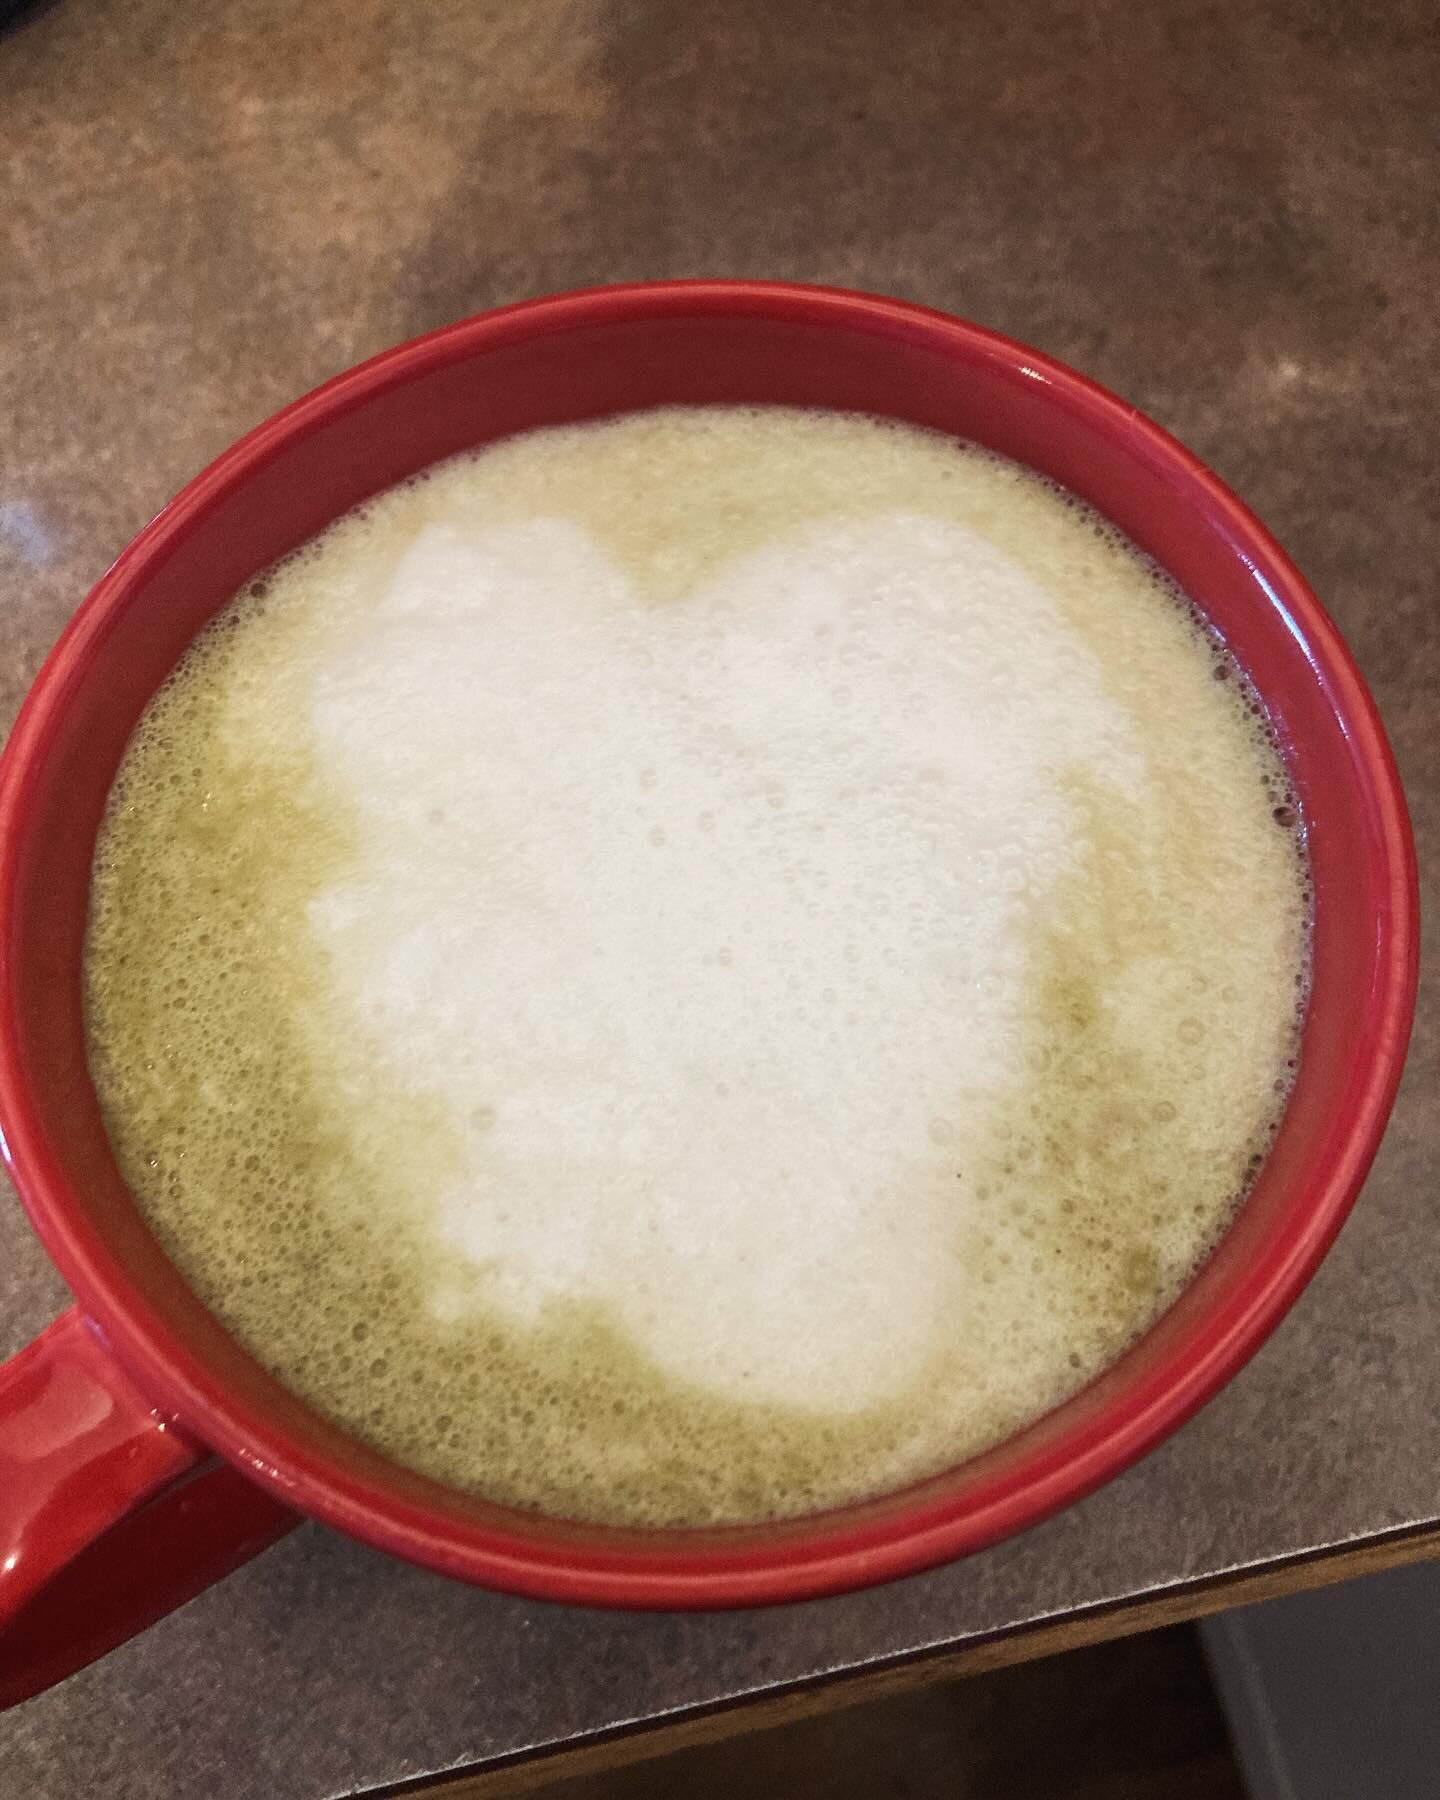 How cute is it that there is a heart in my tea I made this morning? I love that my word of the year is joy. I don&rsquo;t think I would&rsquo;ve noticed the heart if joy wasn&rsquo;t on my mind! I&rsquo;ve also been doing a lot of compassion work so 